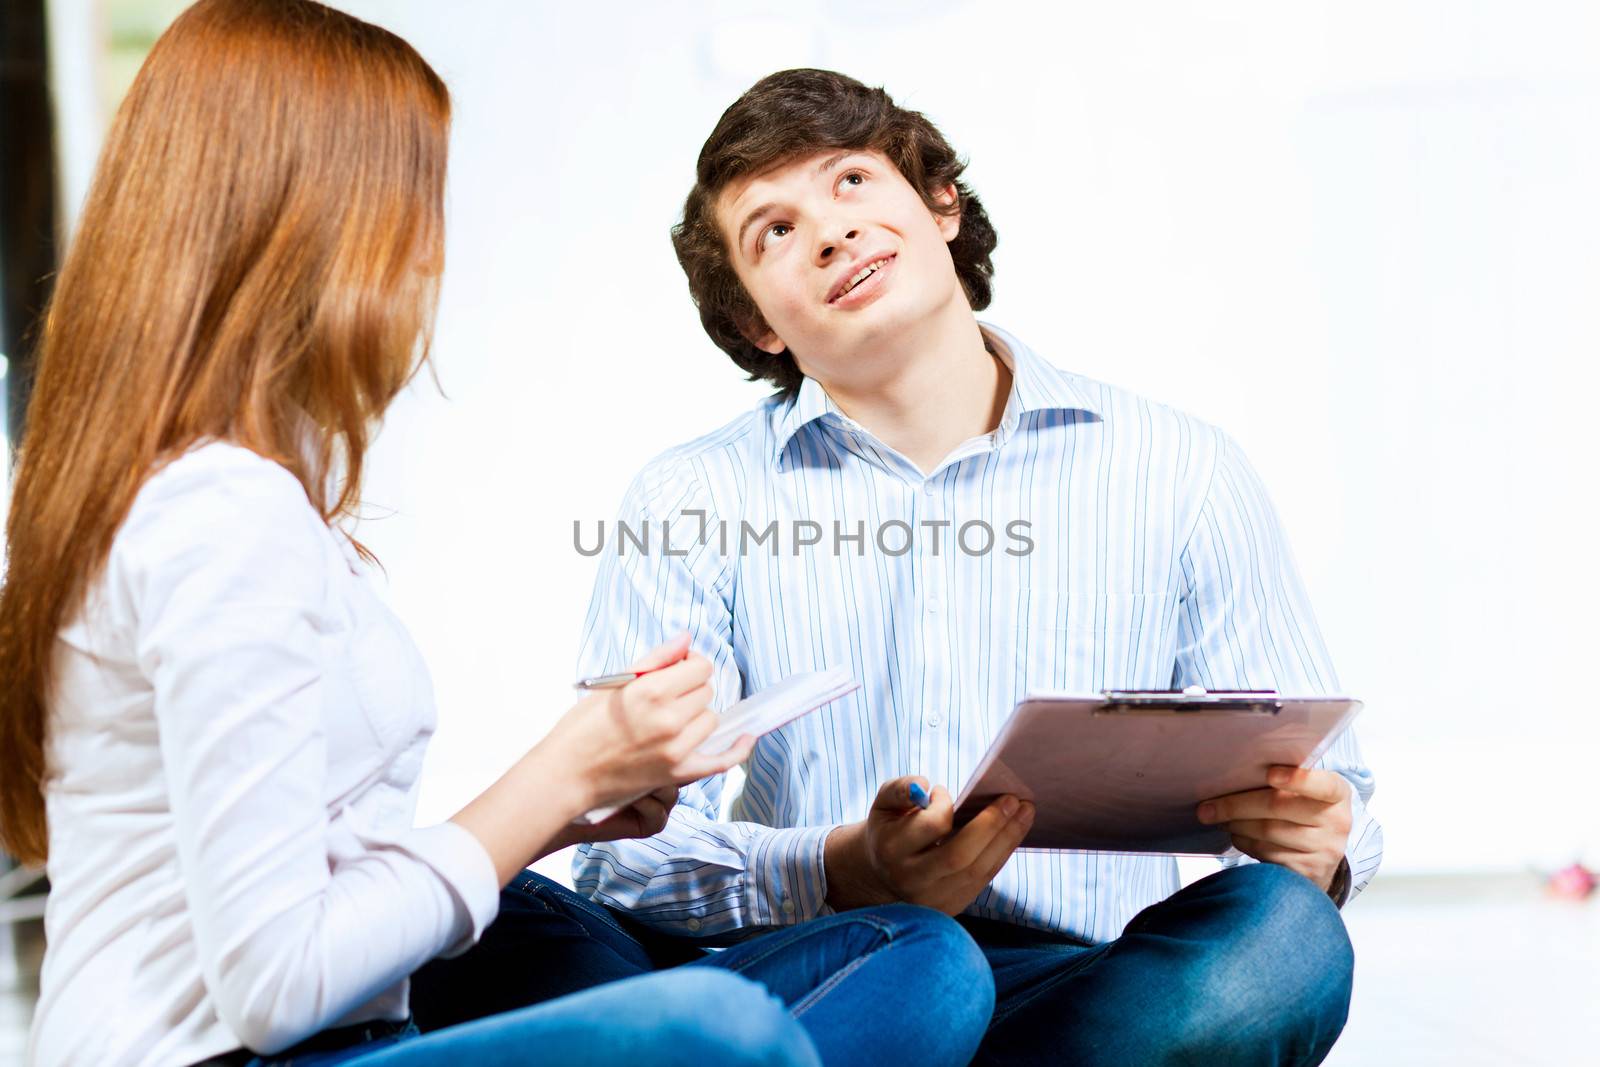 Image of two students discussing their work